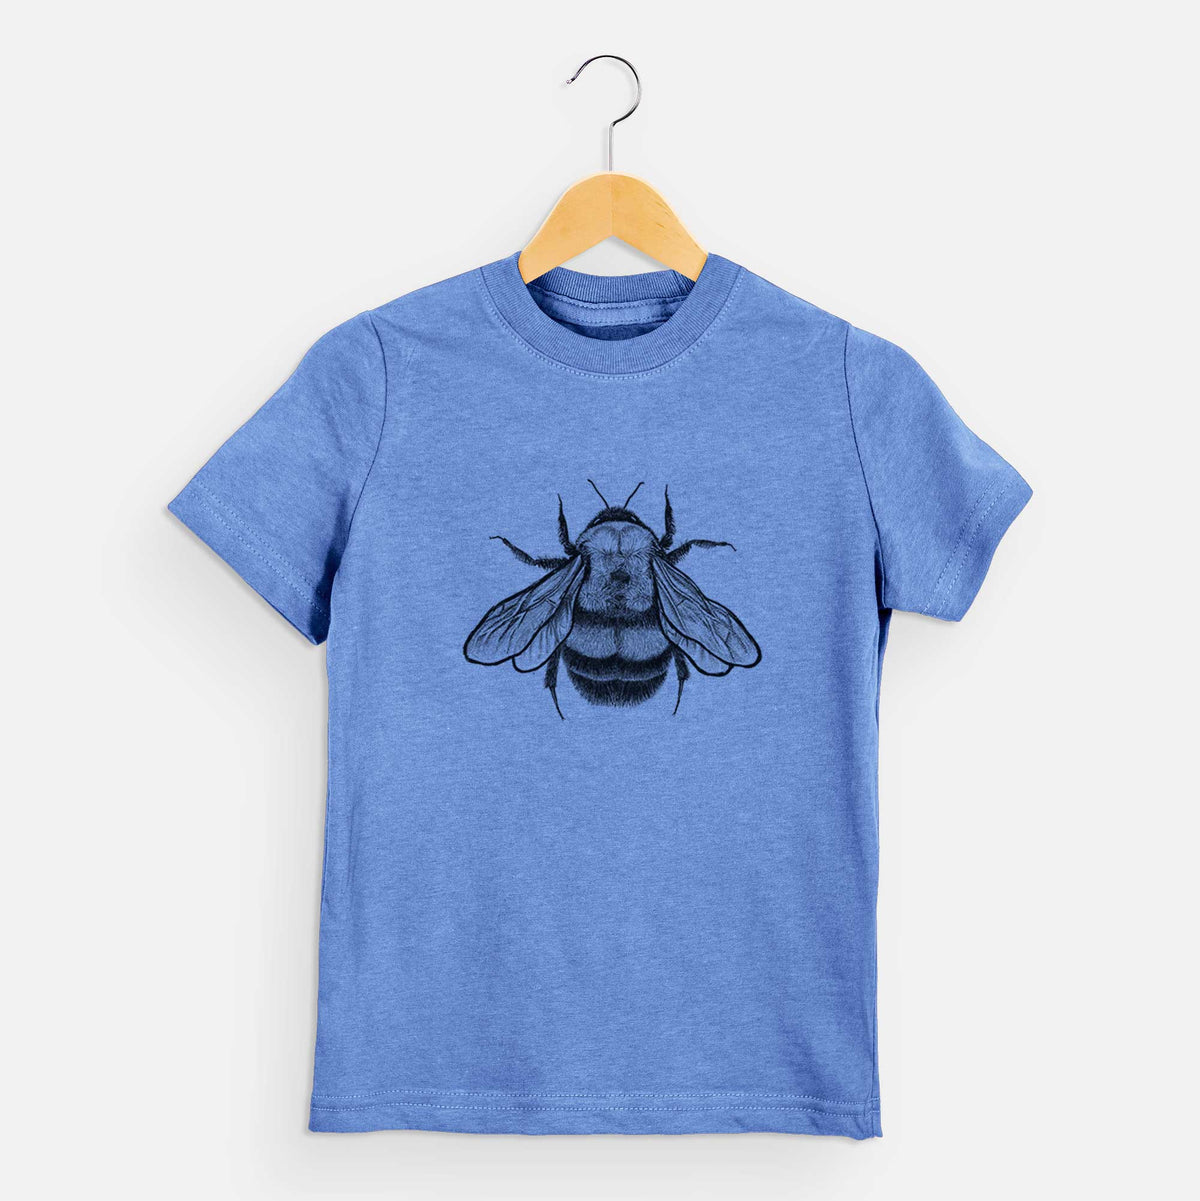 Bombus Affinis - Rusty-Patched Bumble Bee - Kids Shirt